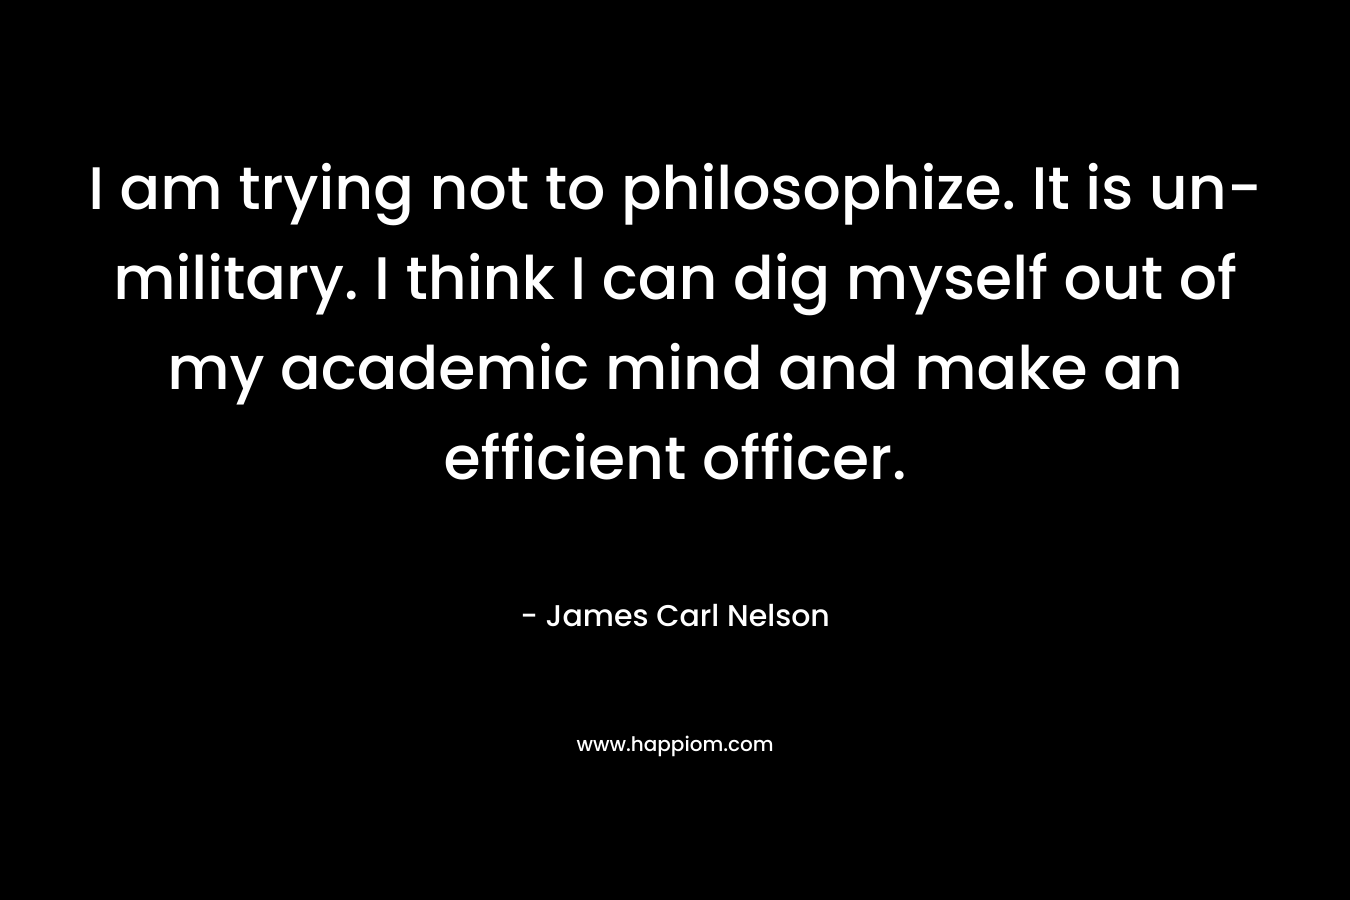 I am trying not to philosophize. It is un-military. I think I can dig myself out of my academic mind and make an efficient officer. – James Carl Nelson